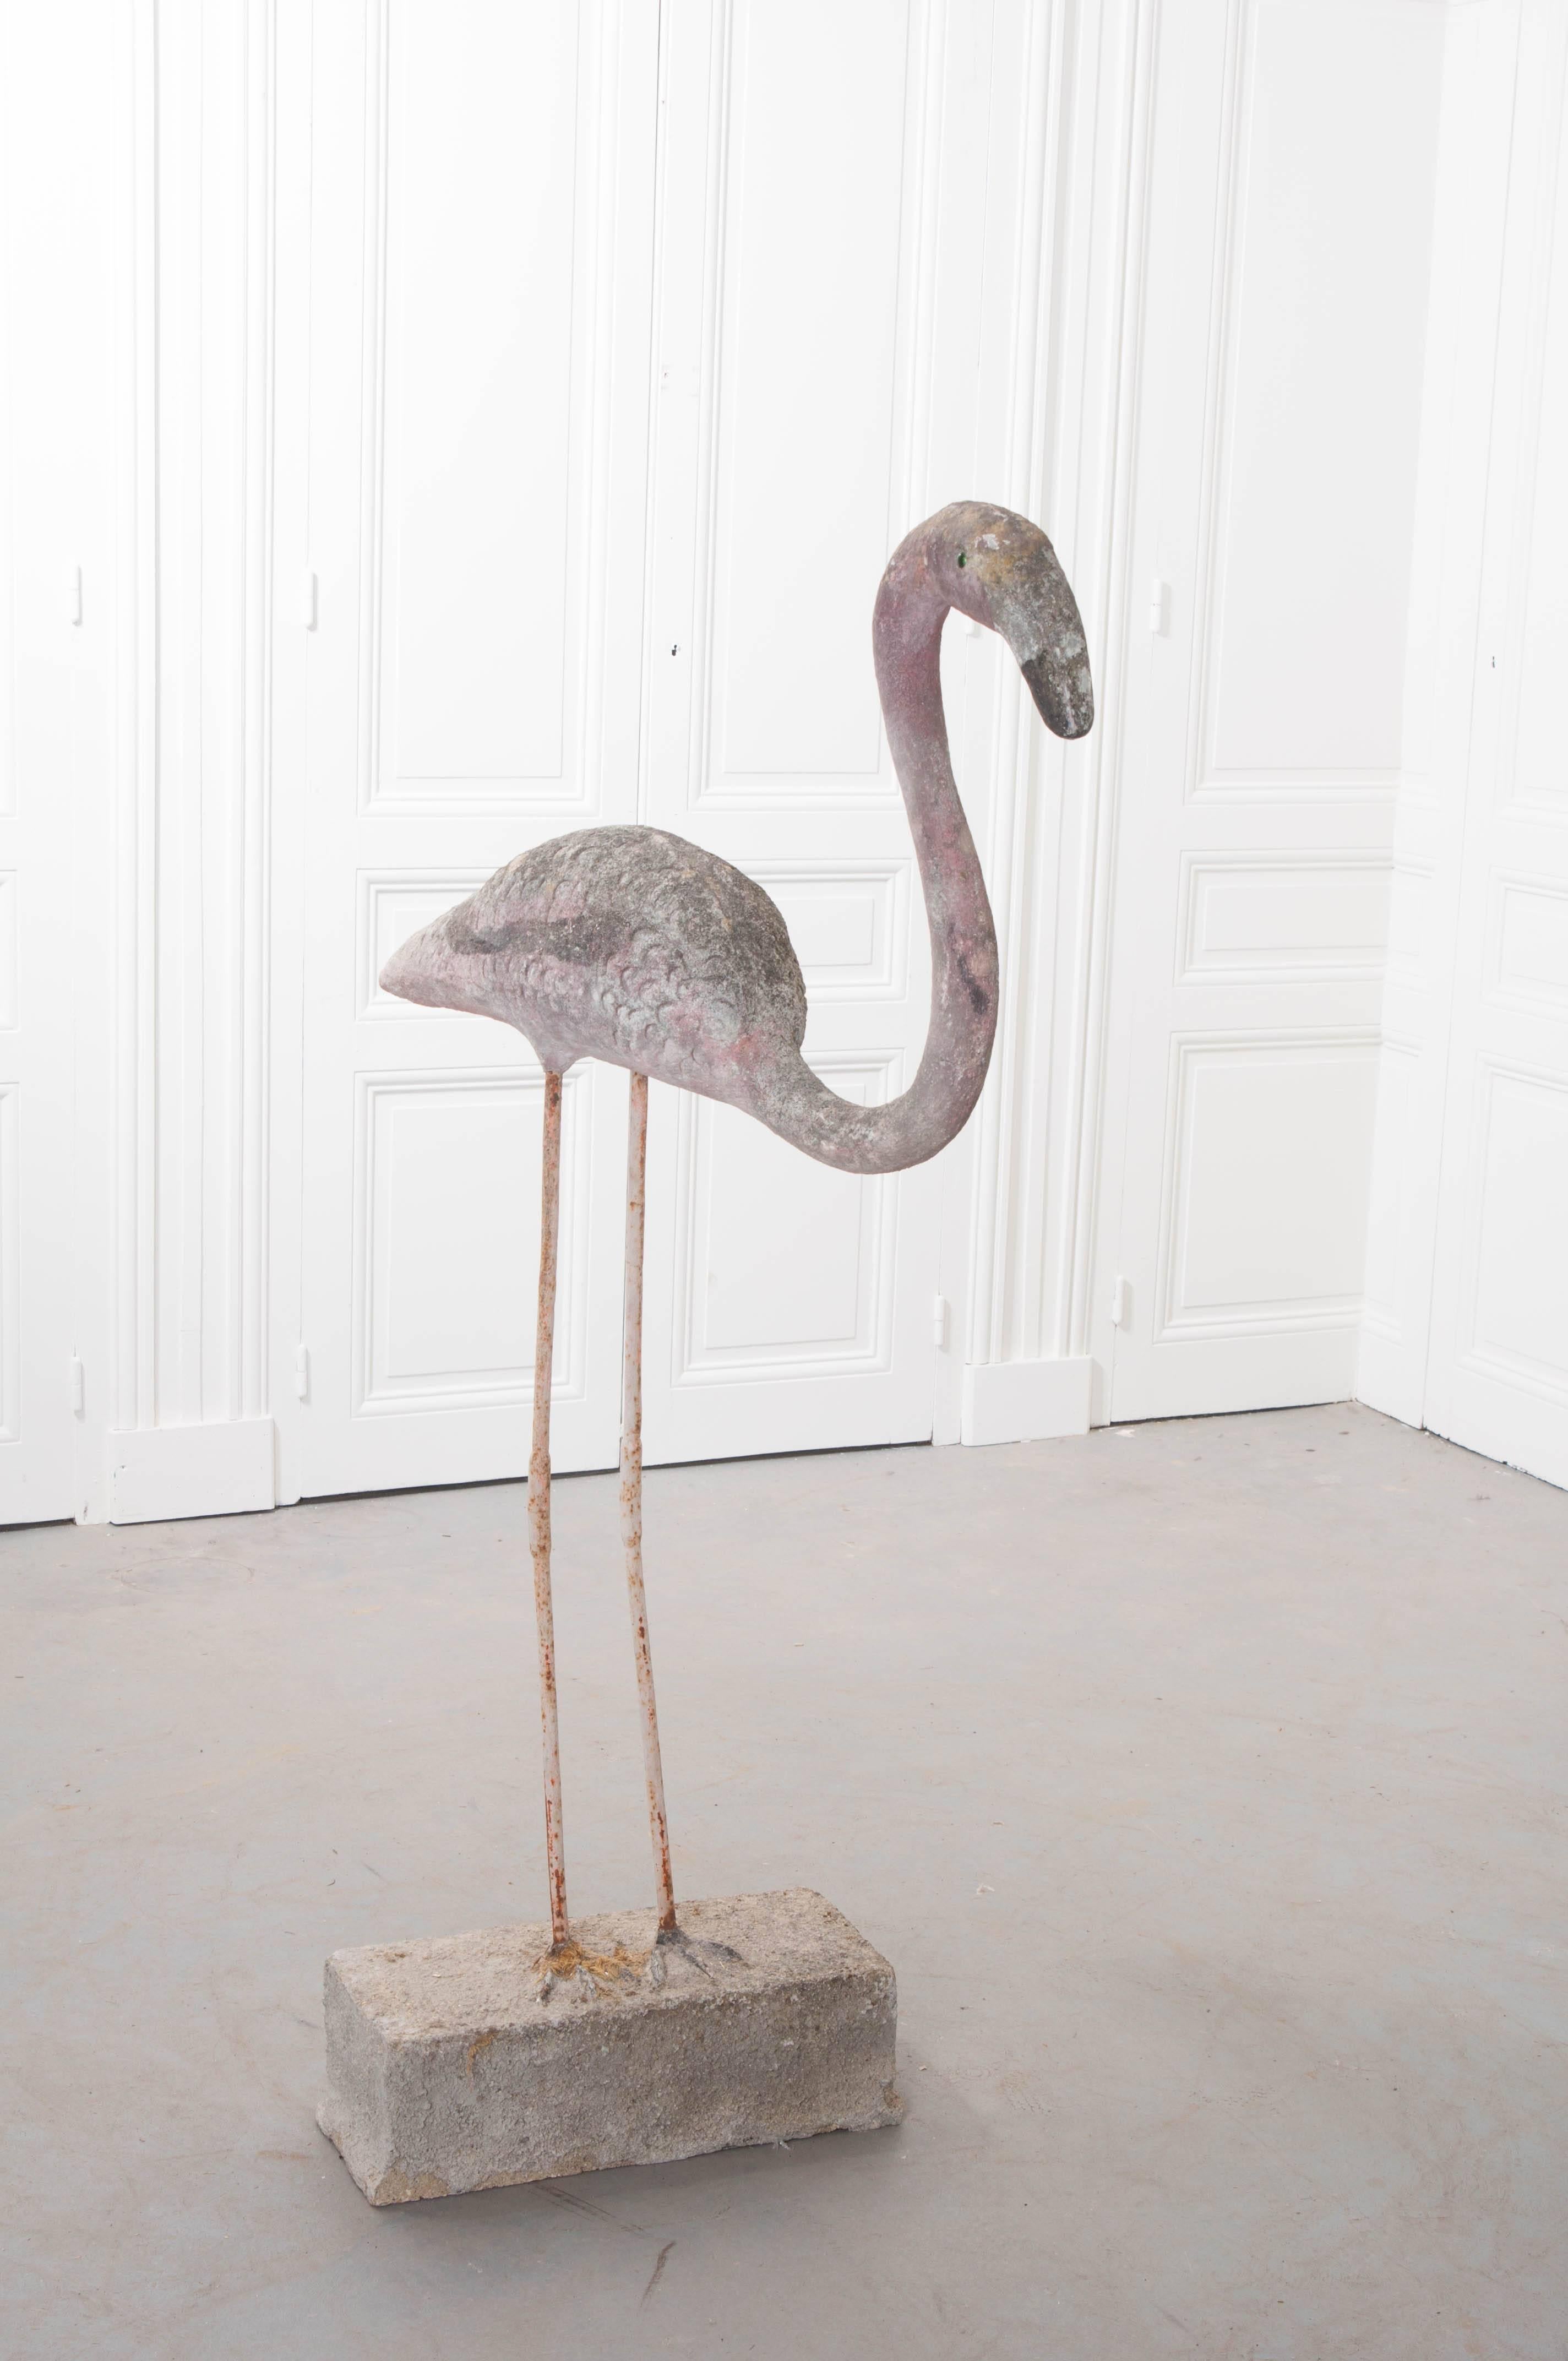 A majestic reconstituted stone flamingo perched upon a stone block with legs made of iron from England, circa 1920. Its graceful, curved neck and detailed feathers create a striking resemblance to the beautiful blush birds. The paint has weathered